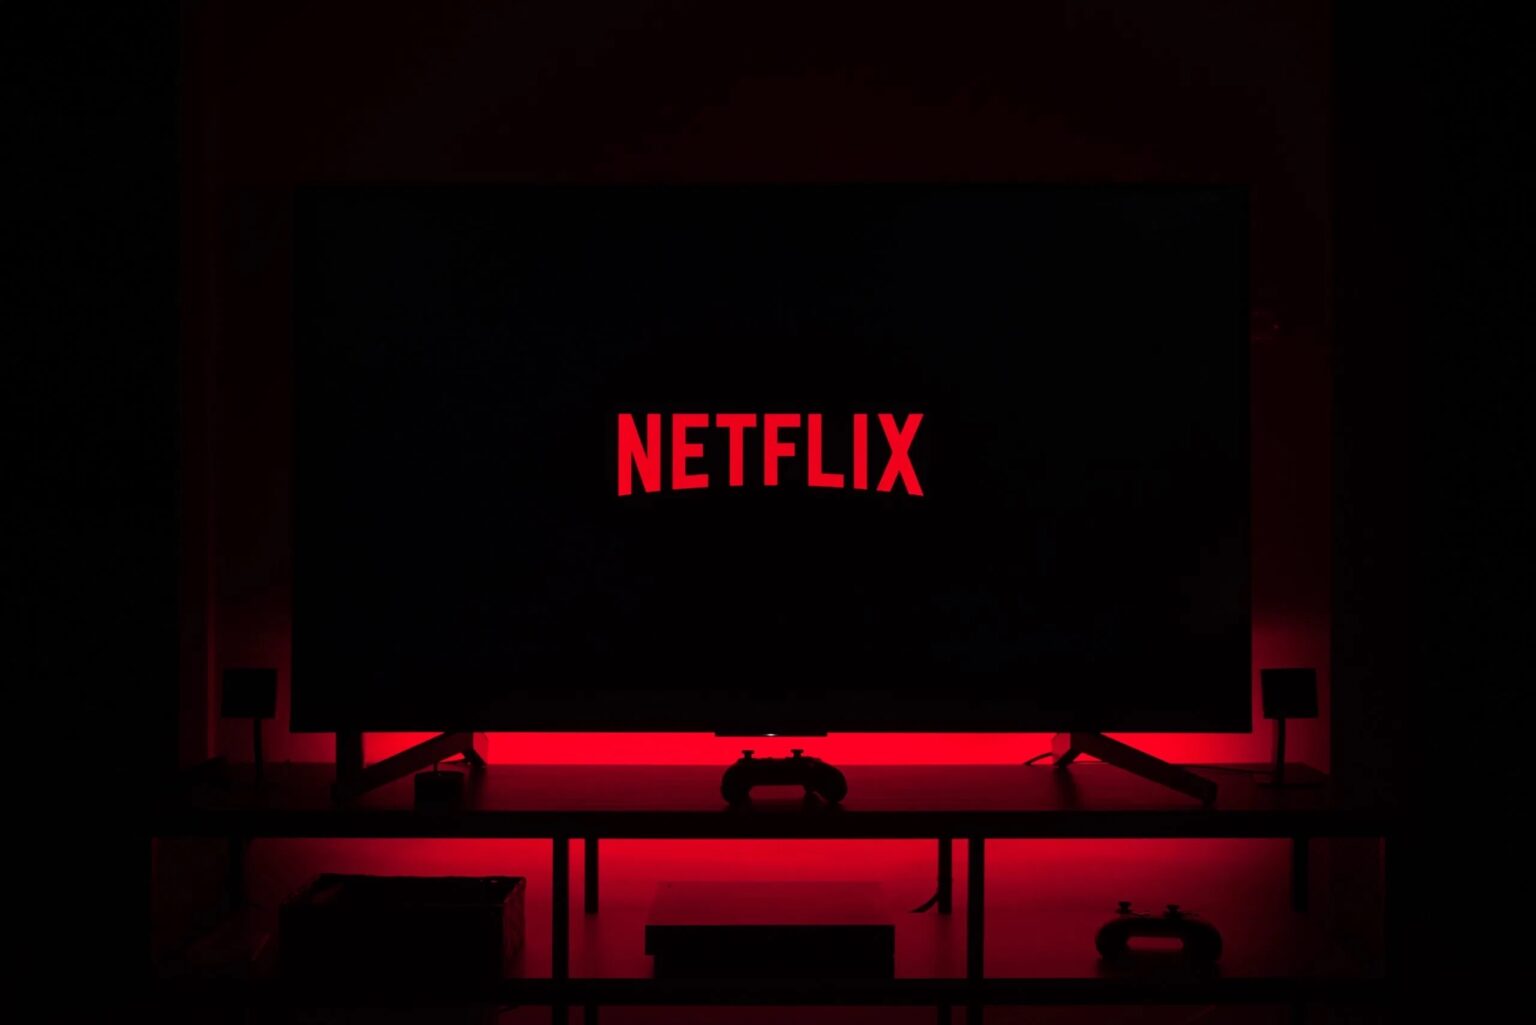 Move over, TV & movies, it's time for some exciting, all-new content. Take a look at what's going to be on Netflix in the very near future.